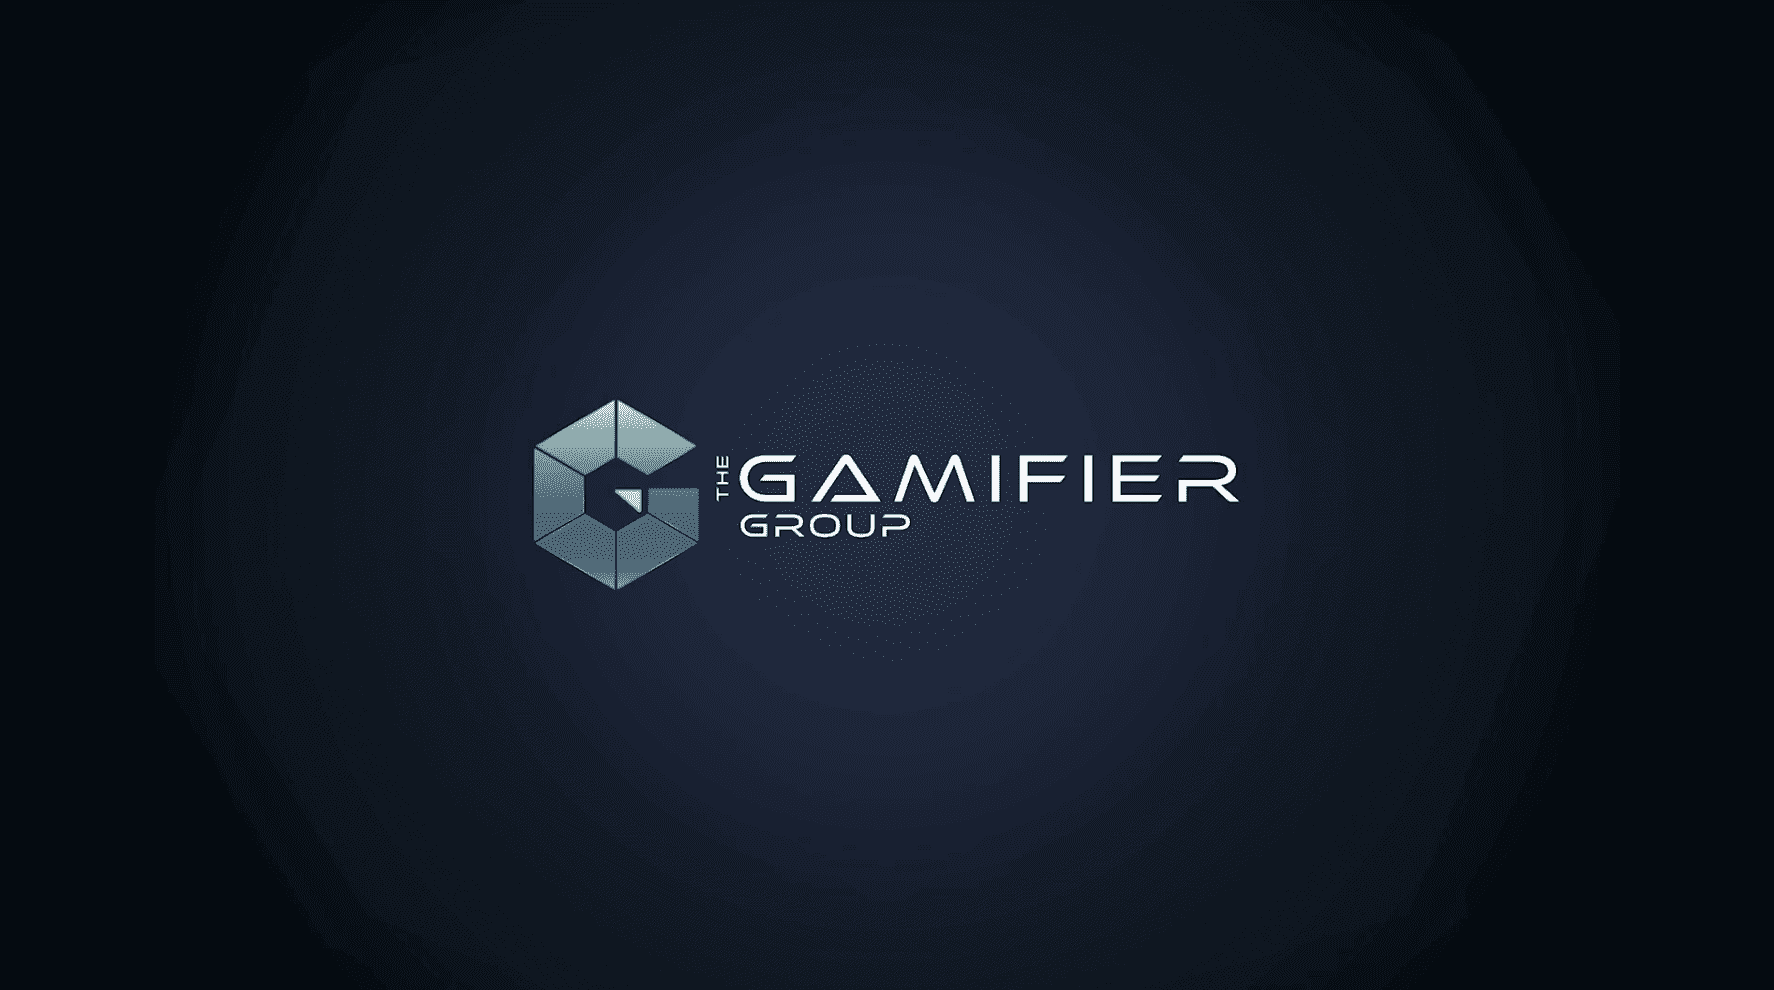 The Gamifier Group